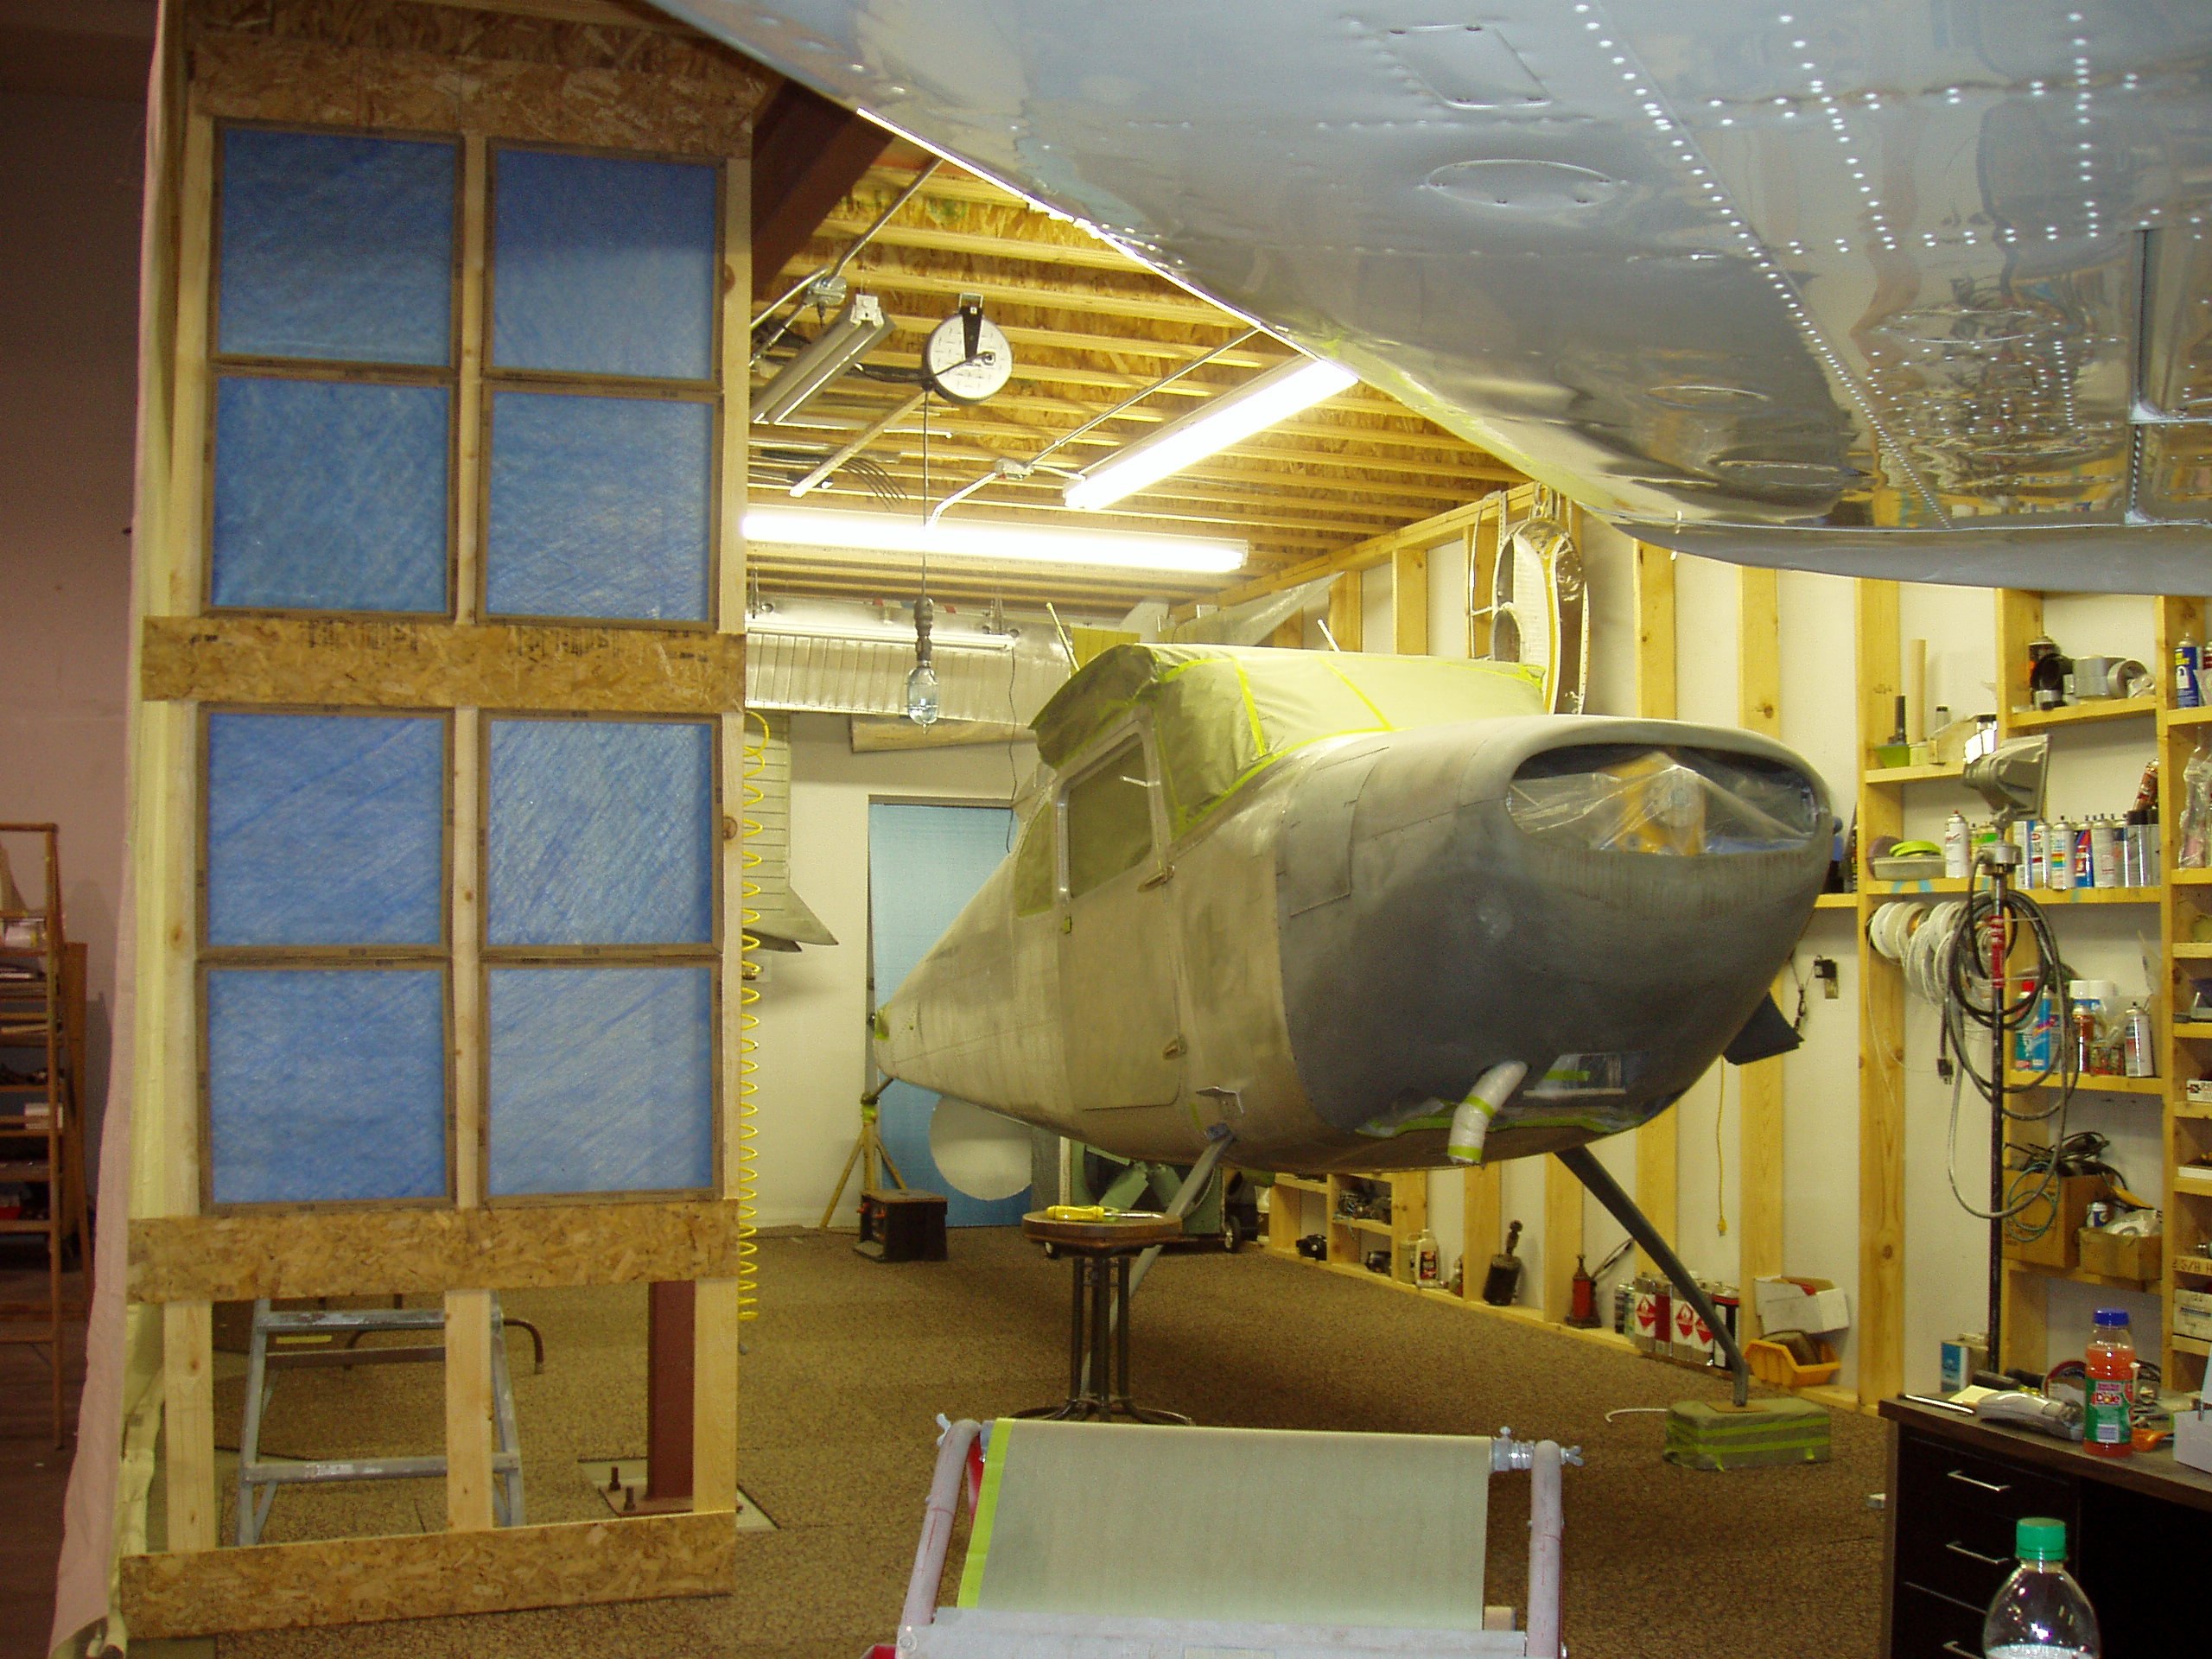 The Cessna 180 Skywagon in the paint booth - Tailwheel